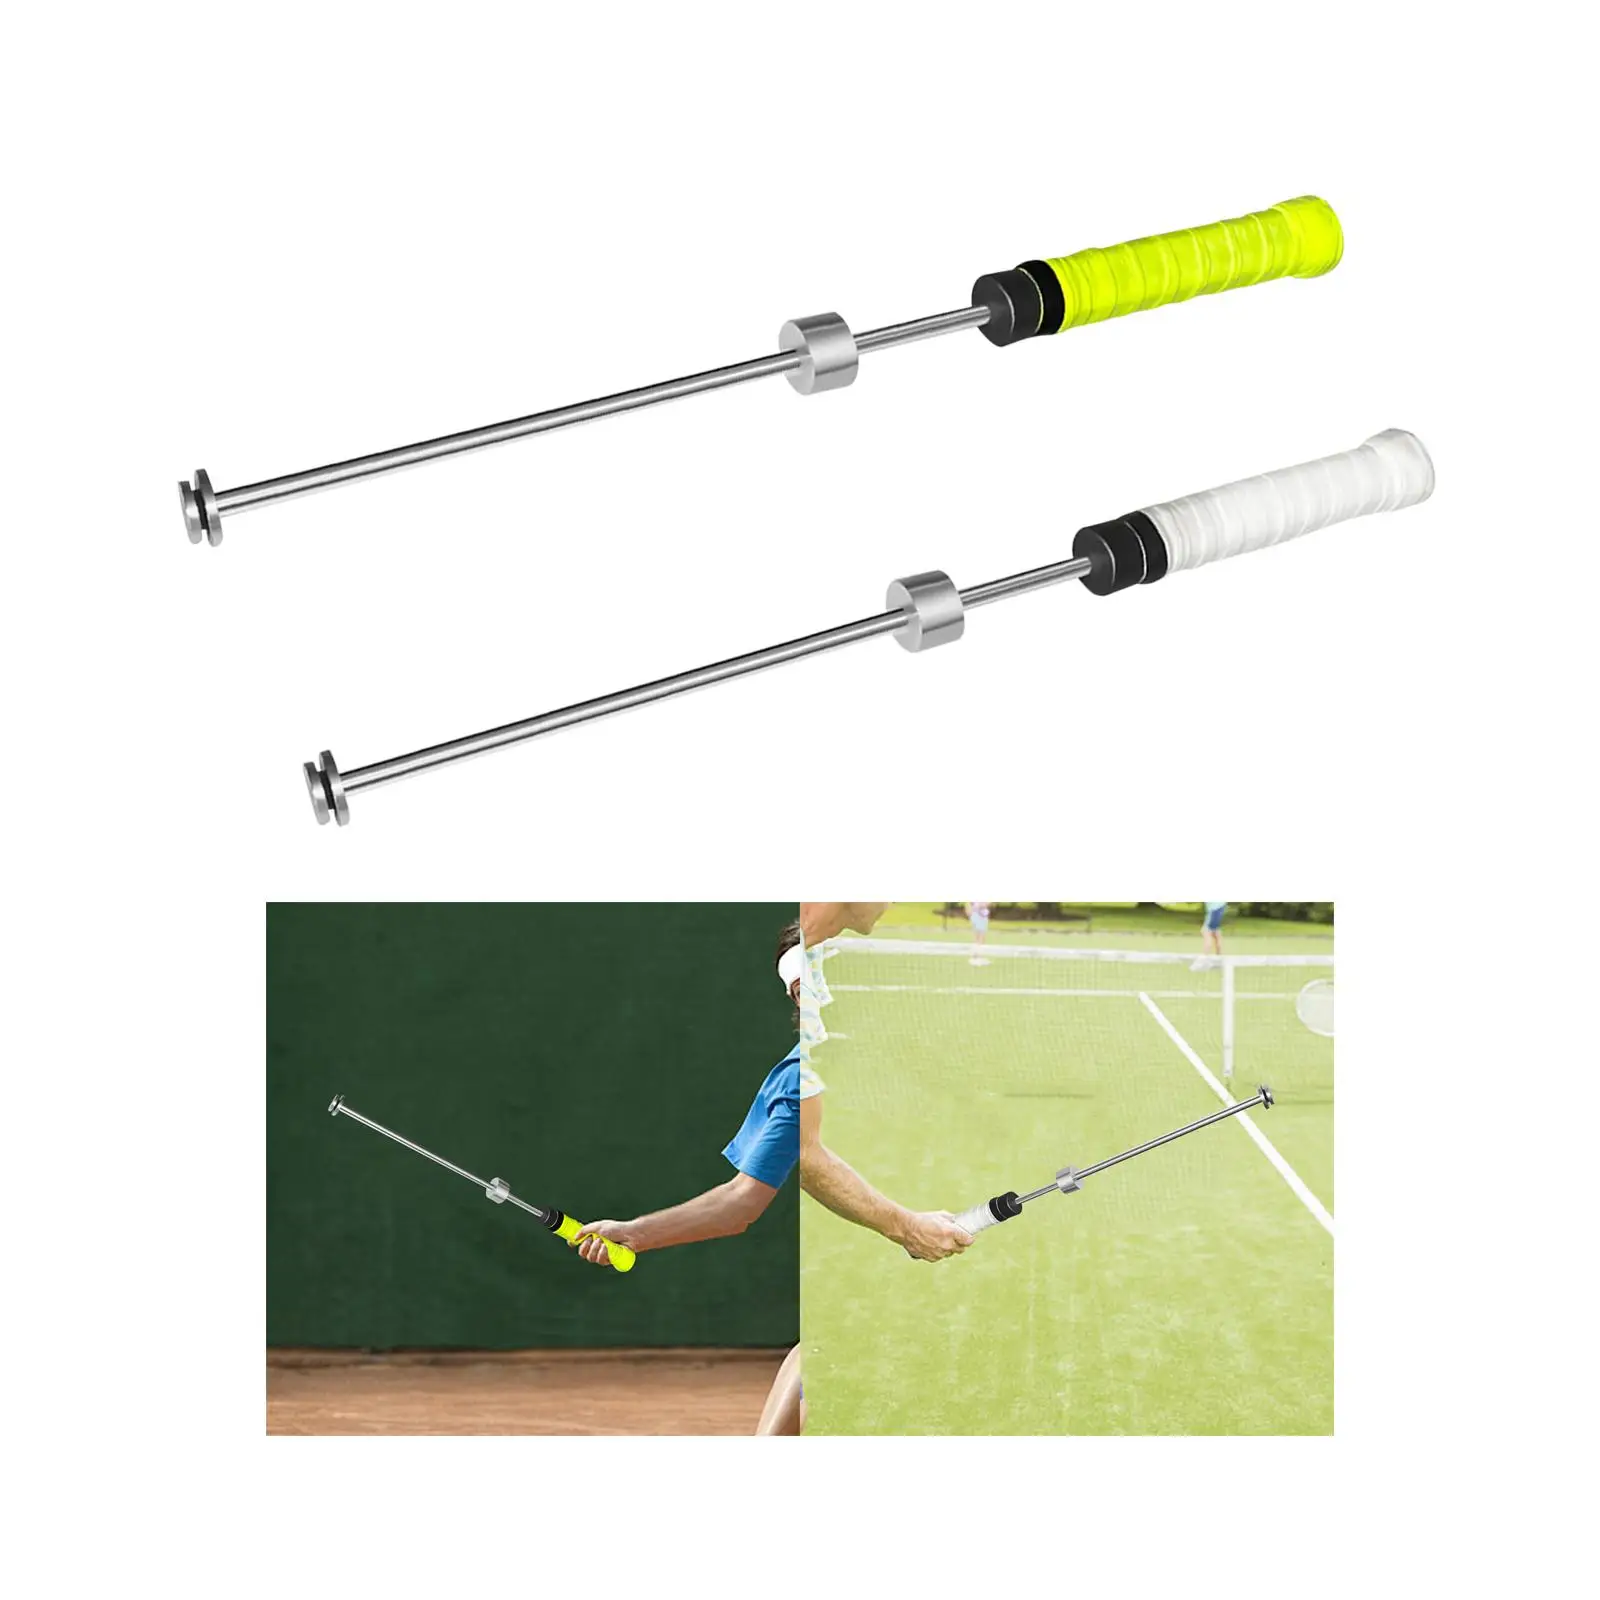 Tennis Swing Trainer Aid Practicing Guide Posture Adjustment Sound Remind